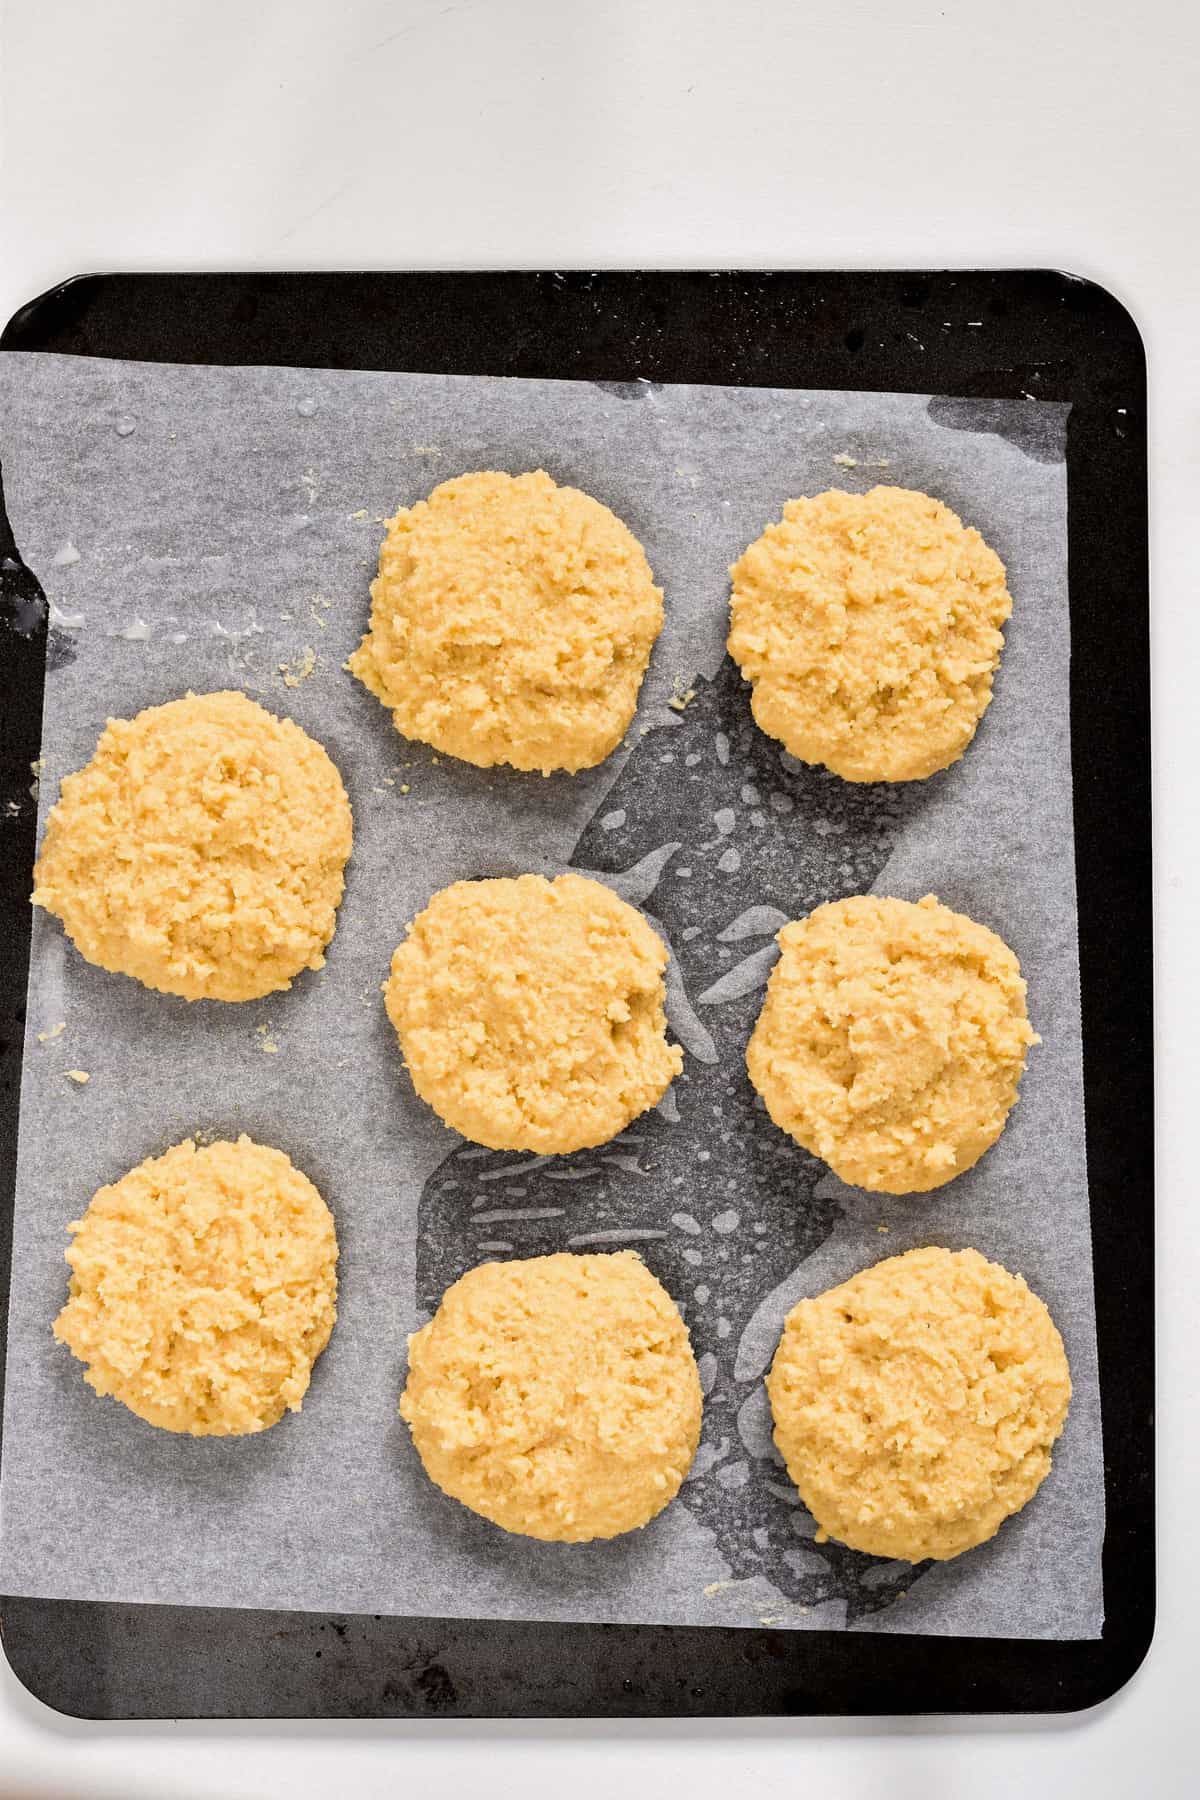 Keto Biscuits On Baking Tray